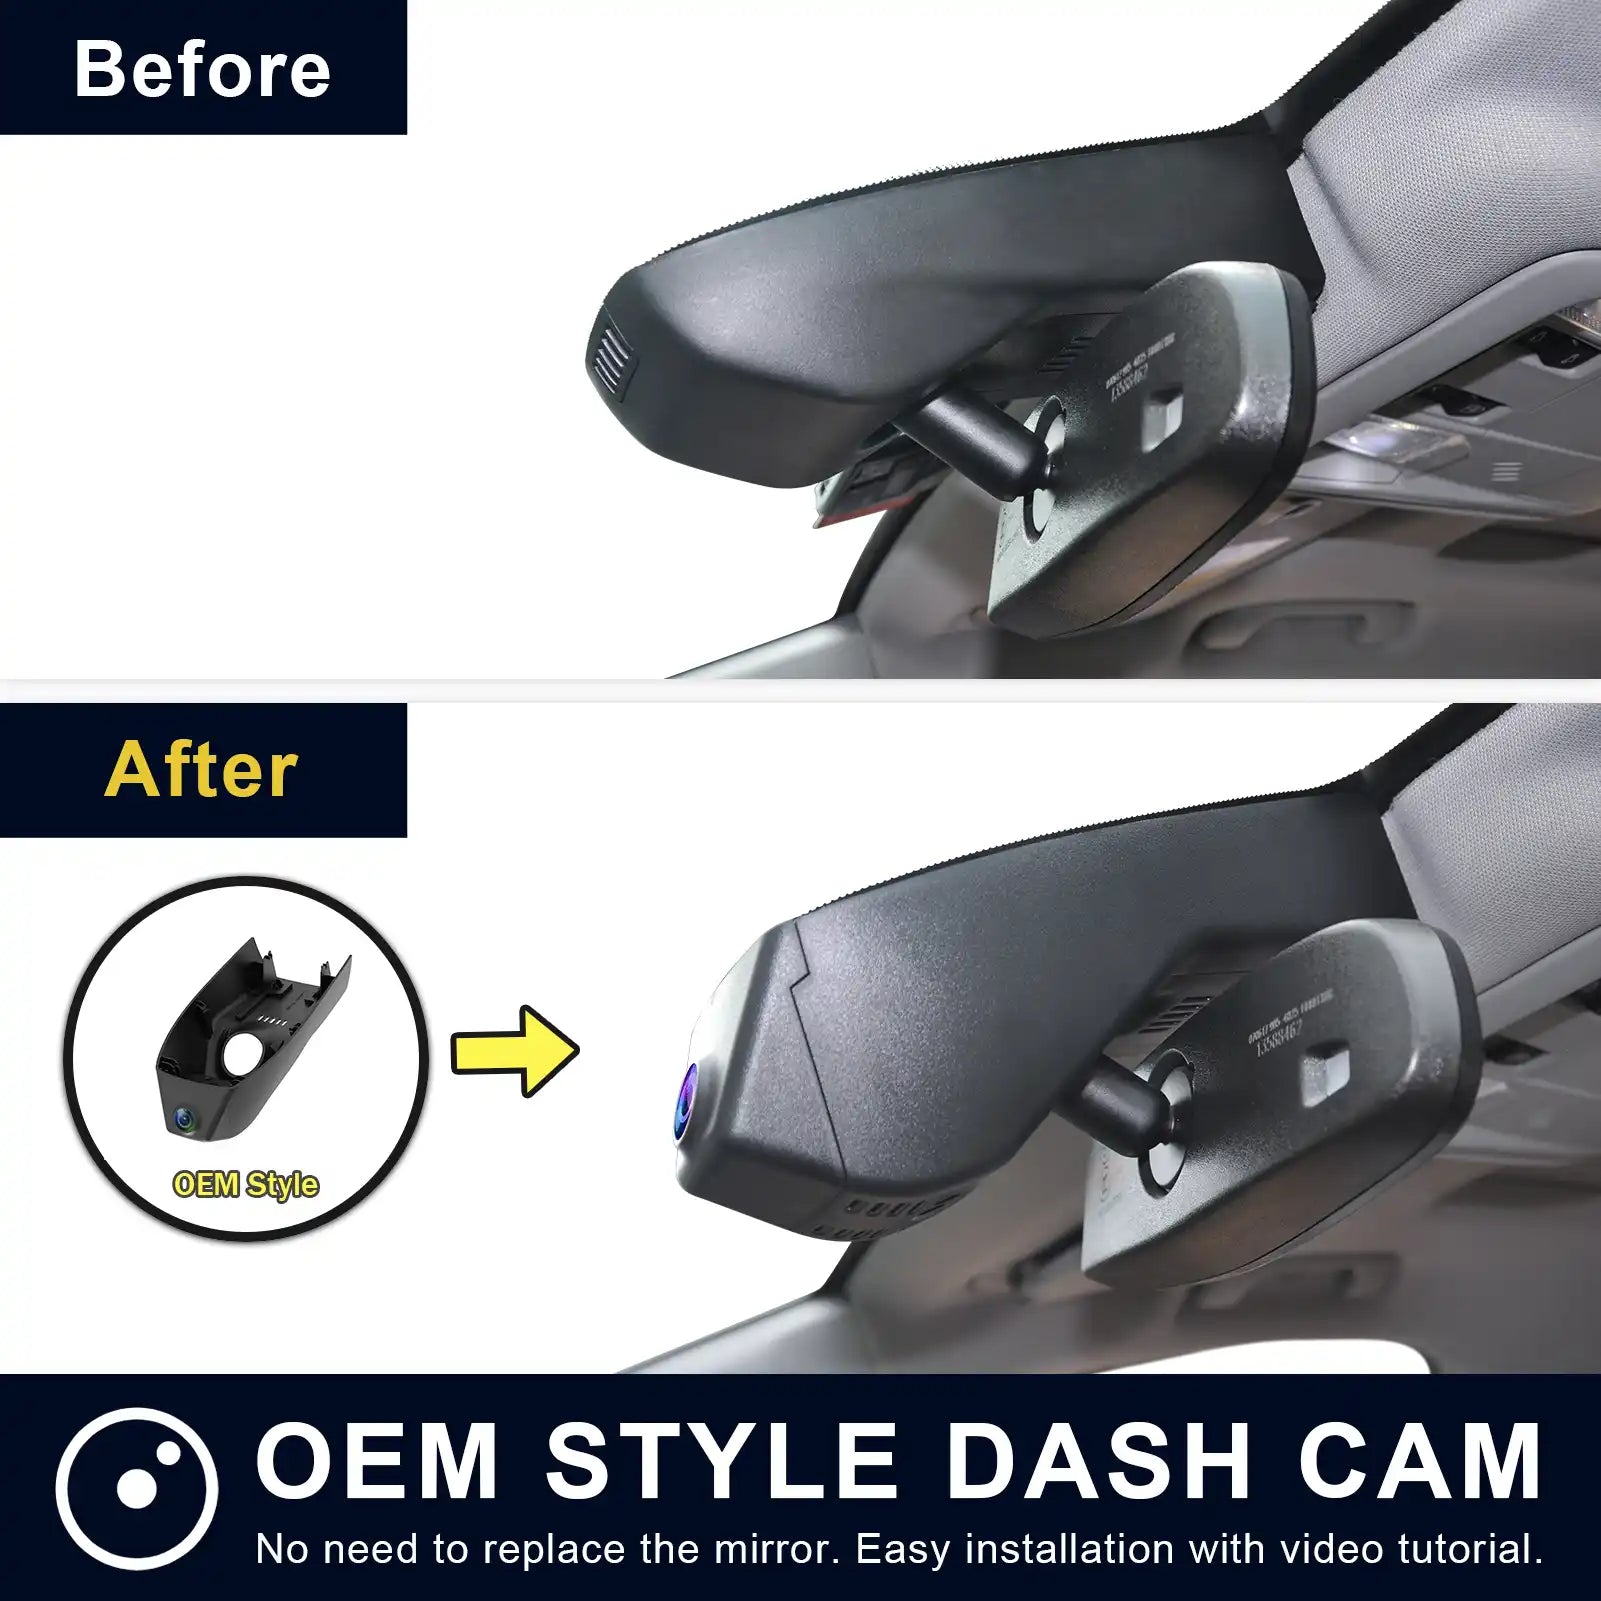 Chevy Blazer  dash cam before & after view